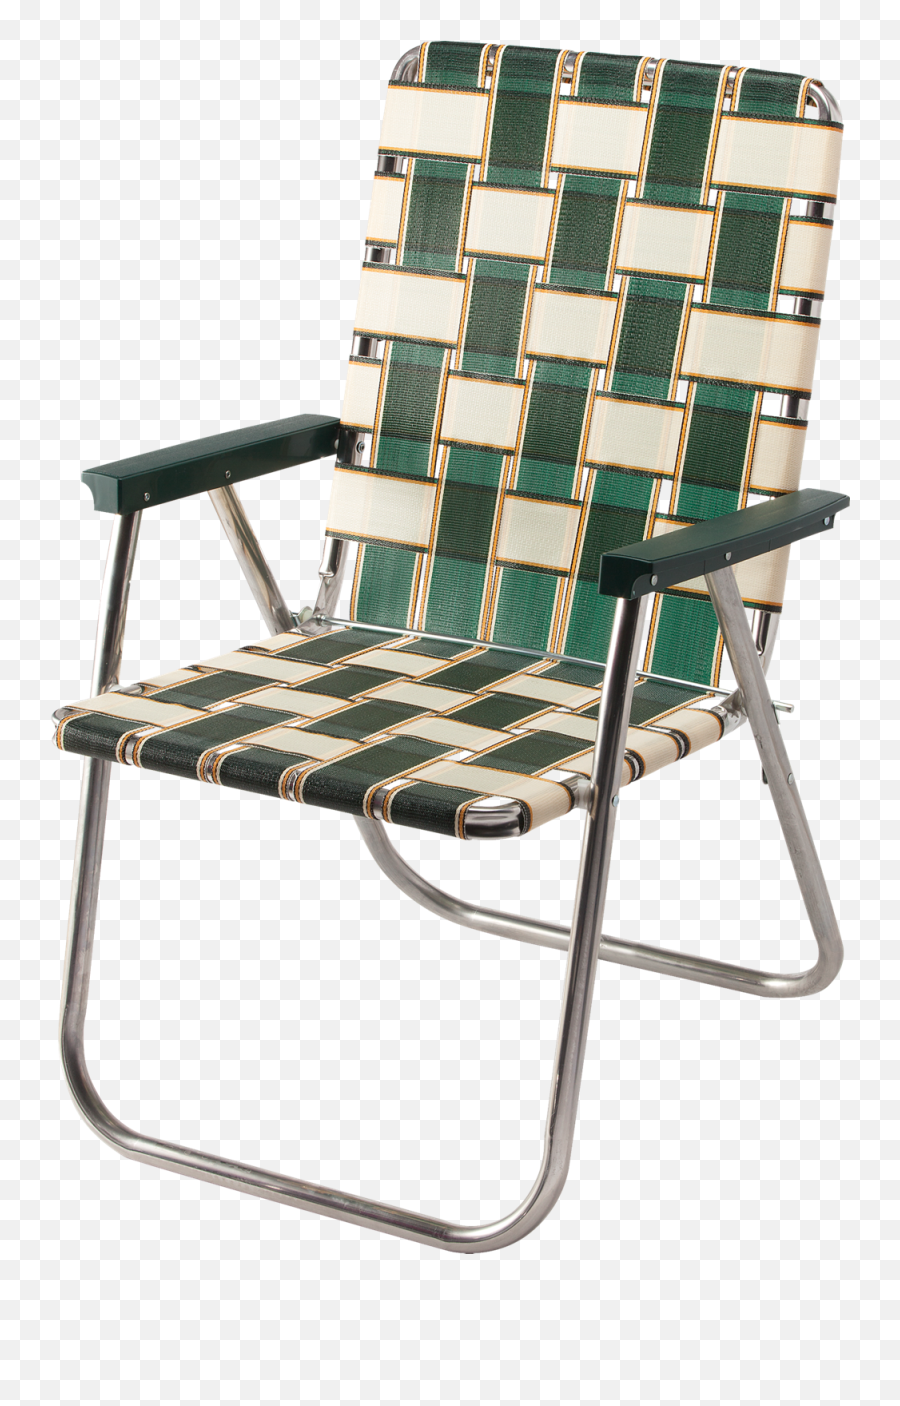 Deluxe Webbed Folding Lawn Chair In - Classic Lawn Chair Png,Lawn Chair Png